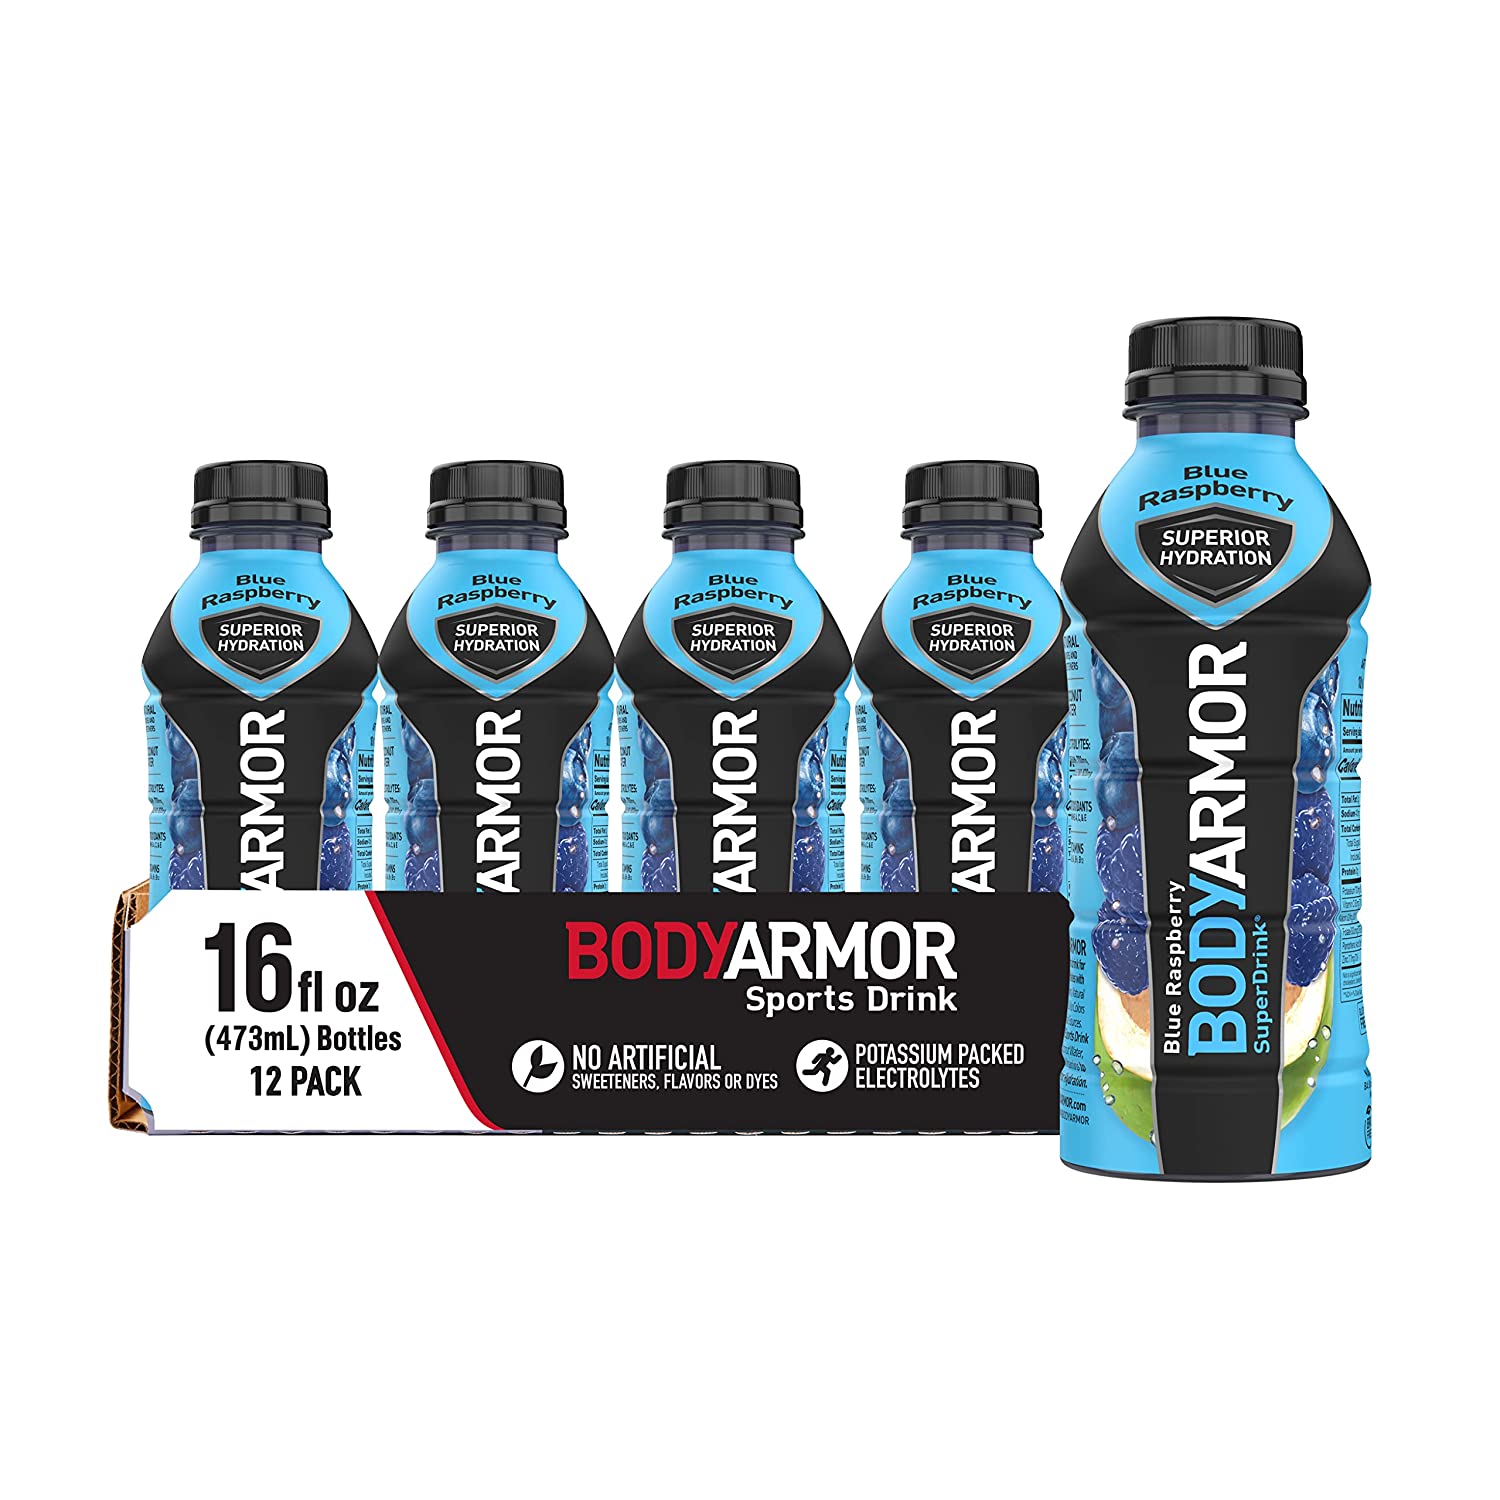 12-Pack 16-Oz BodyArmor Sports Drink (Blue Raspberry) $10.59 w/ S&S + Free Shipping w/ Prime or on orders over $25